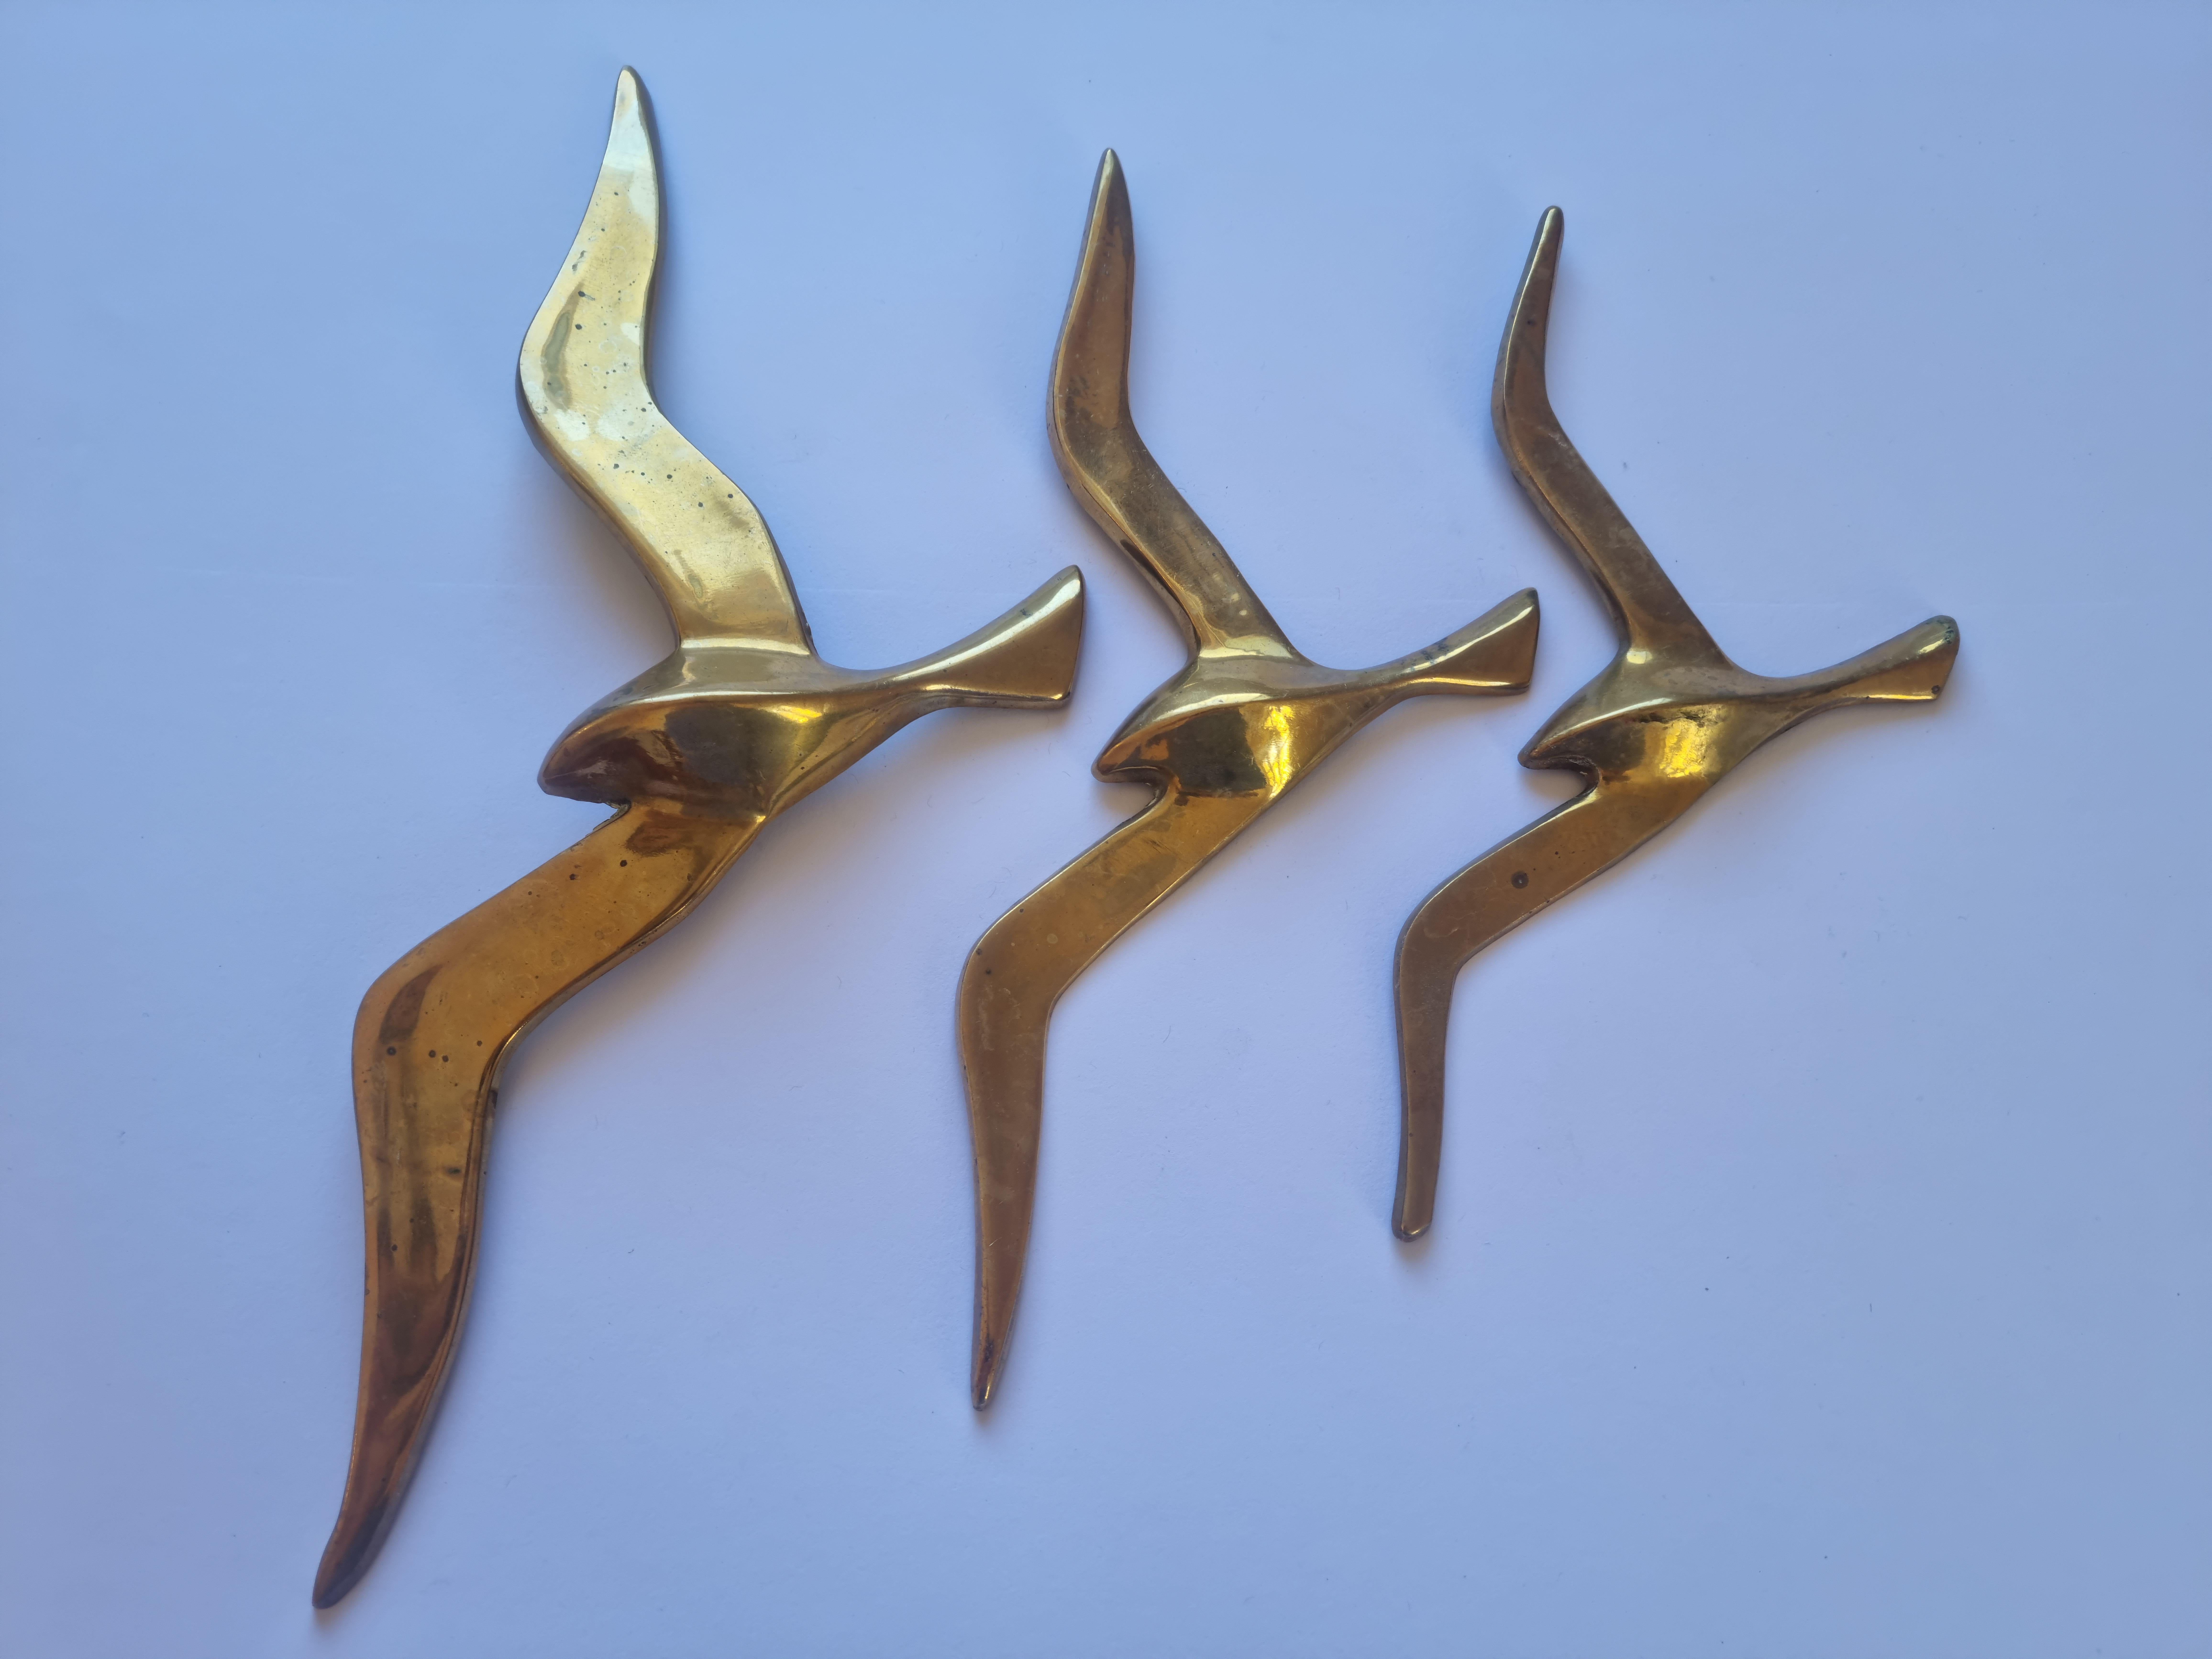 Set of Three Wall Brass Decor Sculptures of Seagulls, Austria, 1960s For Sale 6